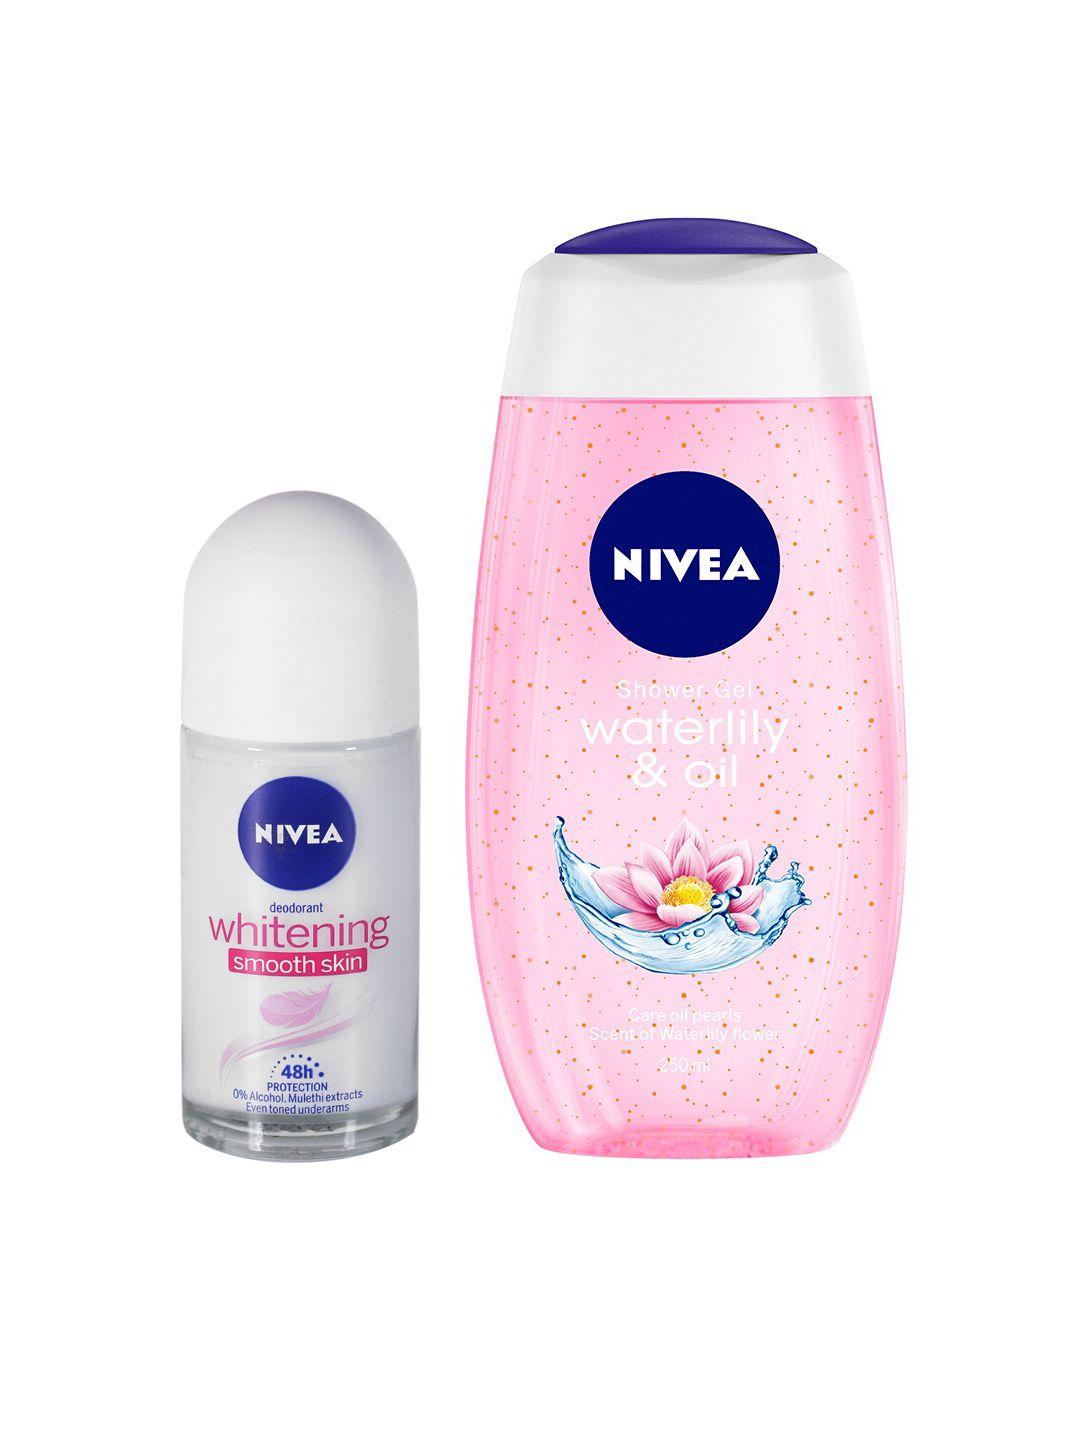 nivea-set-of-waterlily-&-oil-shower-gel-with-whitening-smooth-skin-roll-on-deodorant